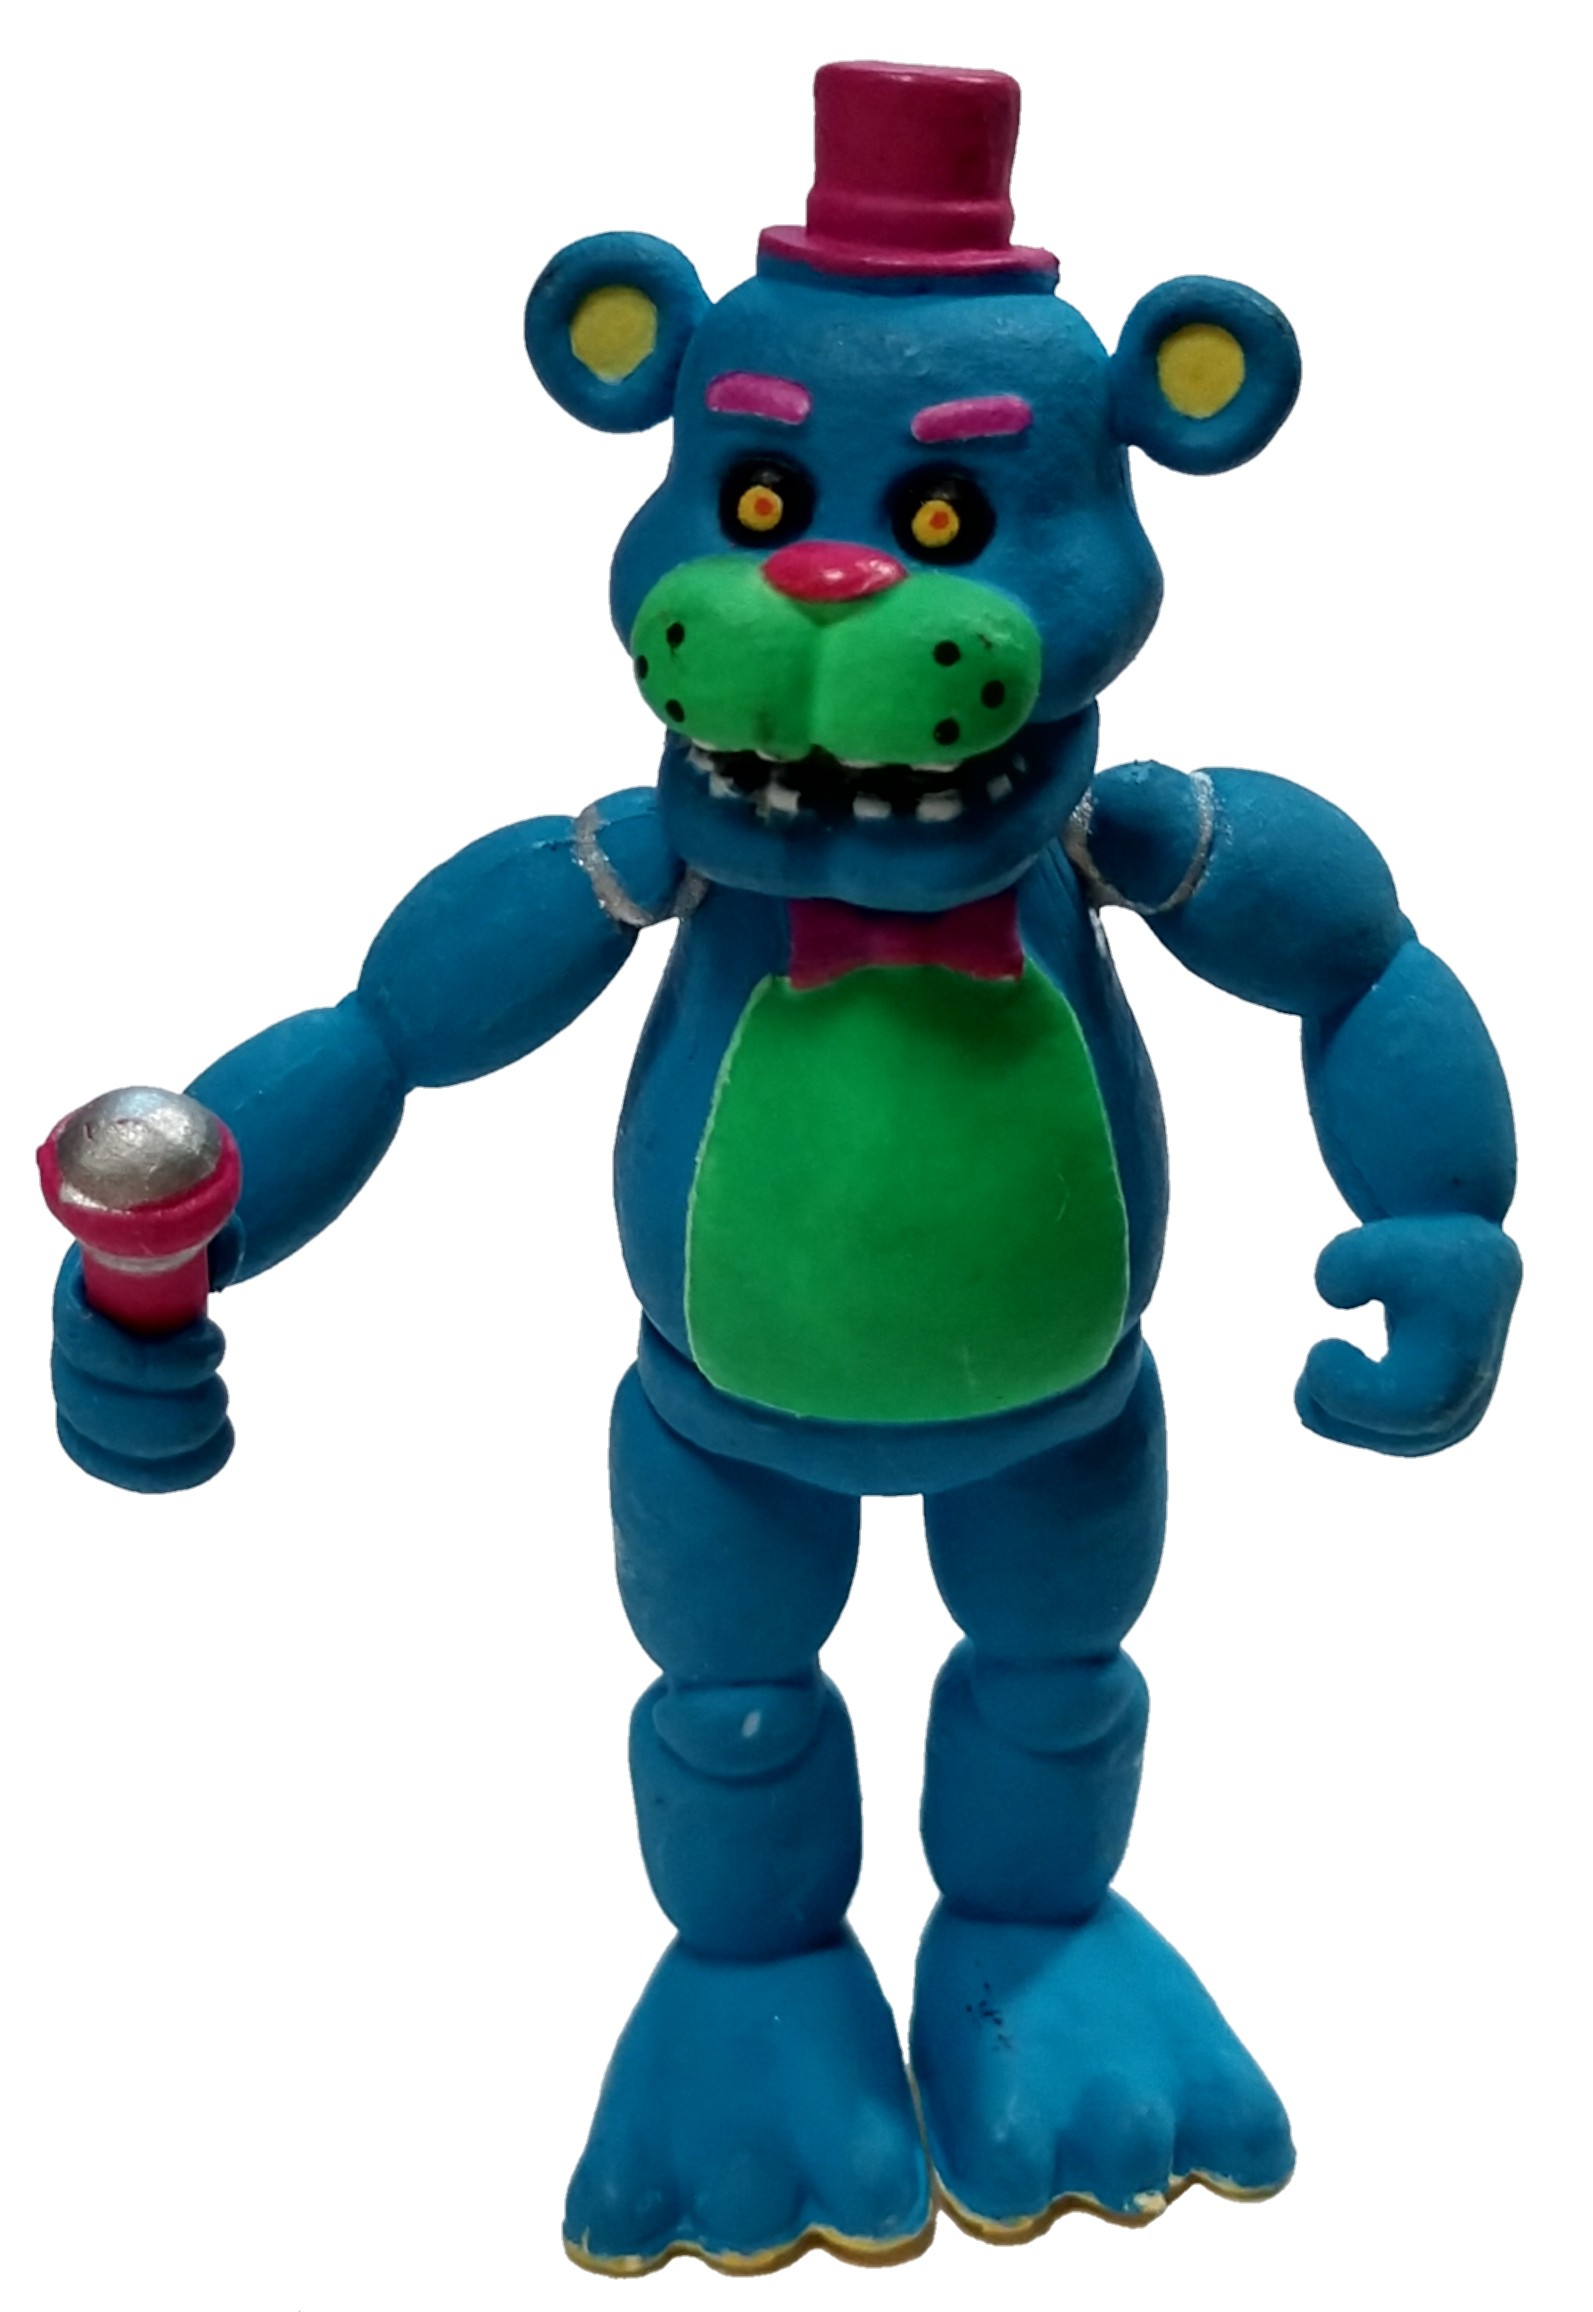 five nights at freddy's blacklight figures